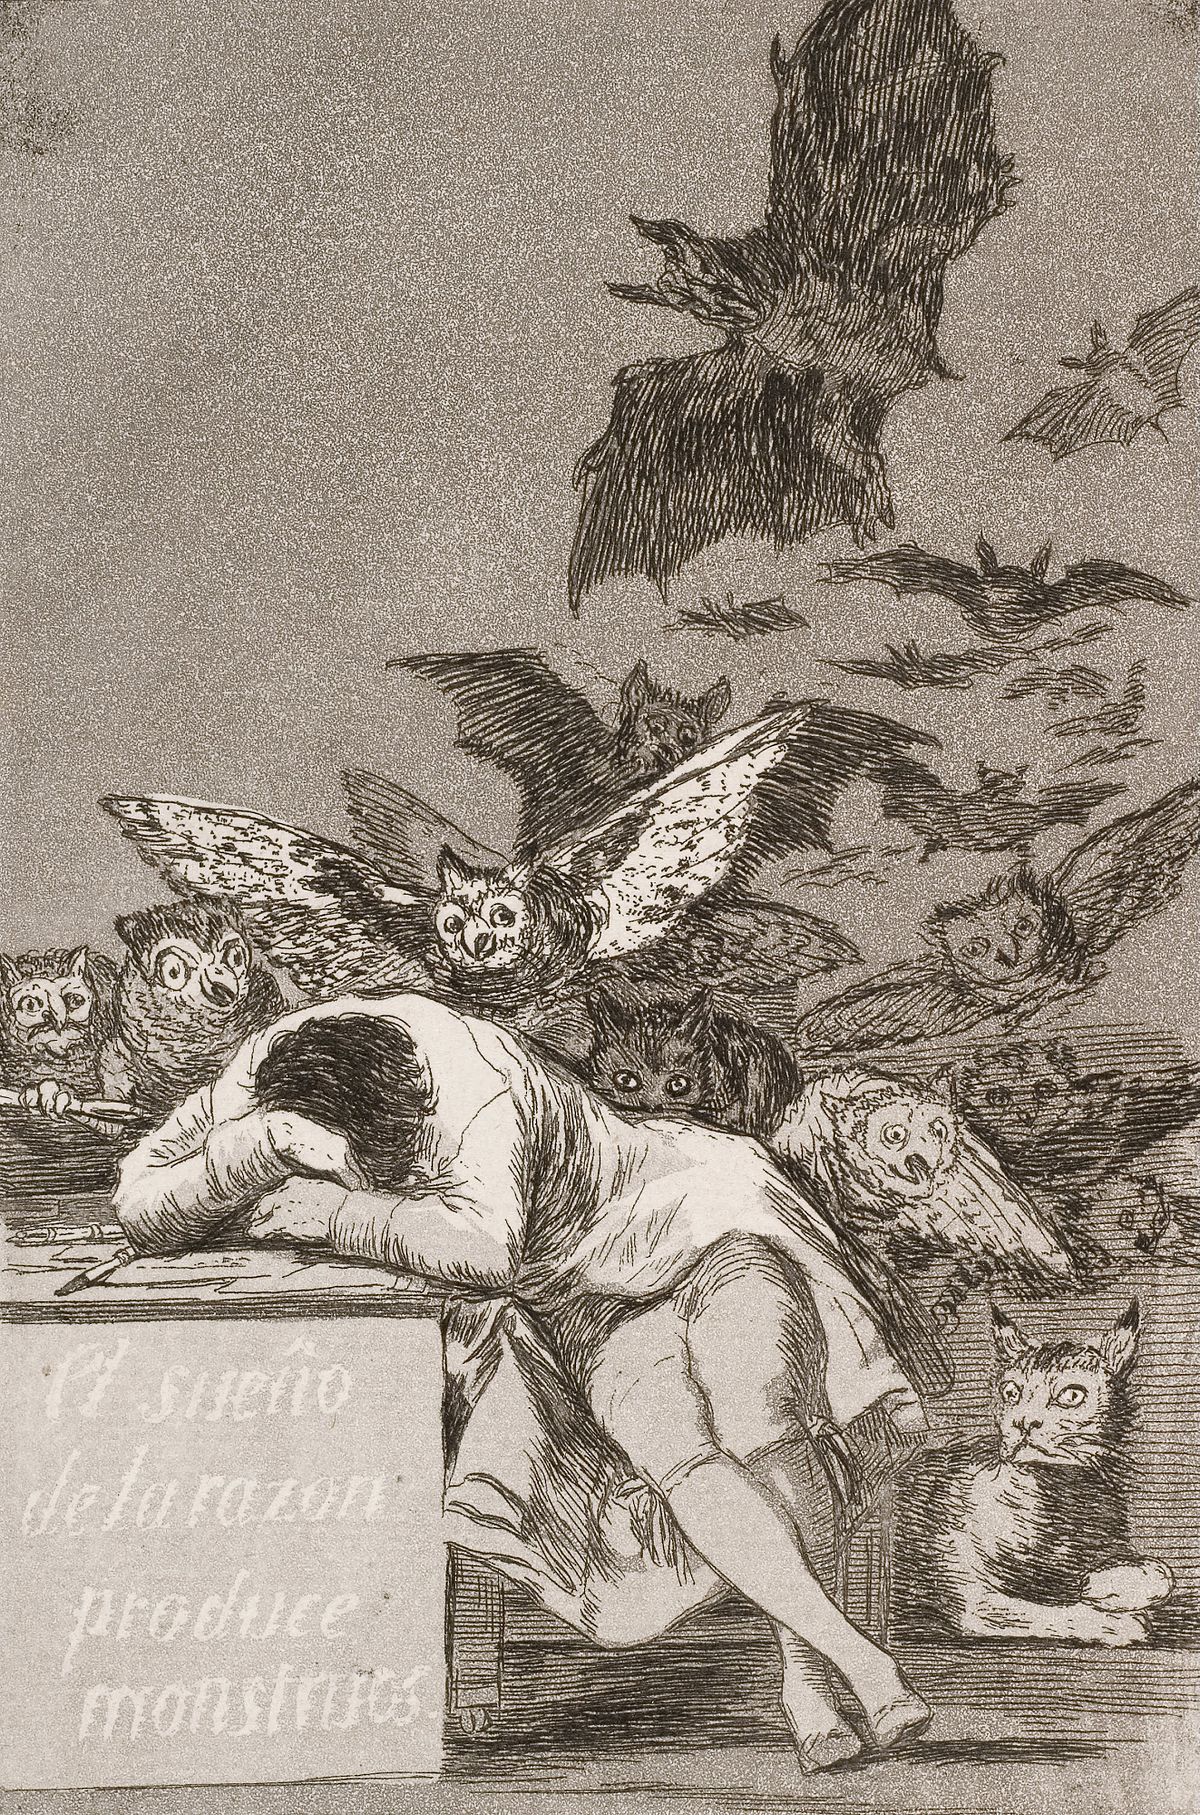 The Sleep of Reason Produces Monsters  by Francisco Goya - 1799 - 21.6 x 15.2 cm private collection